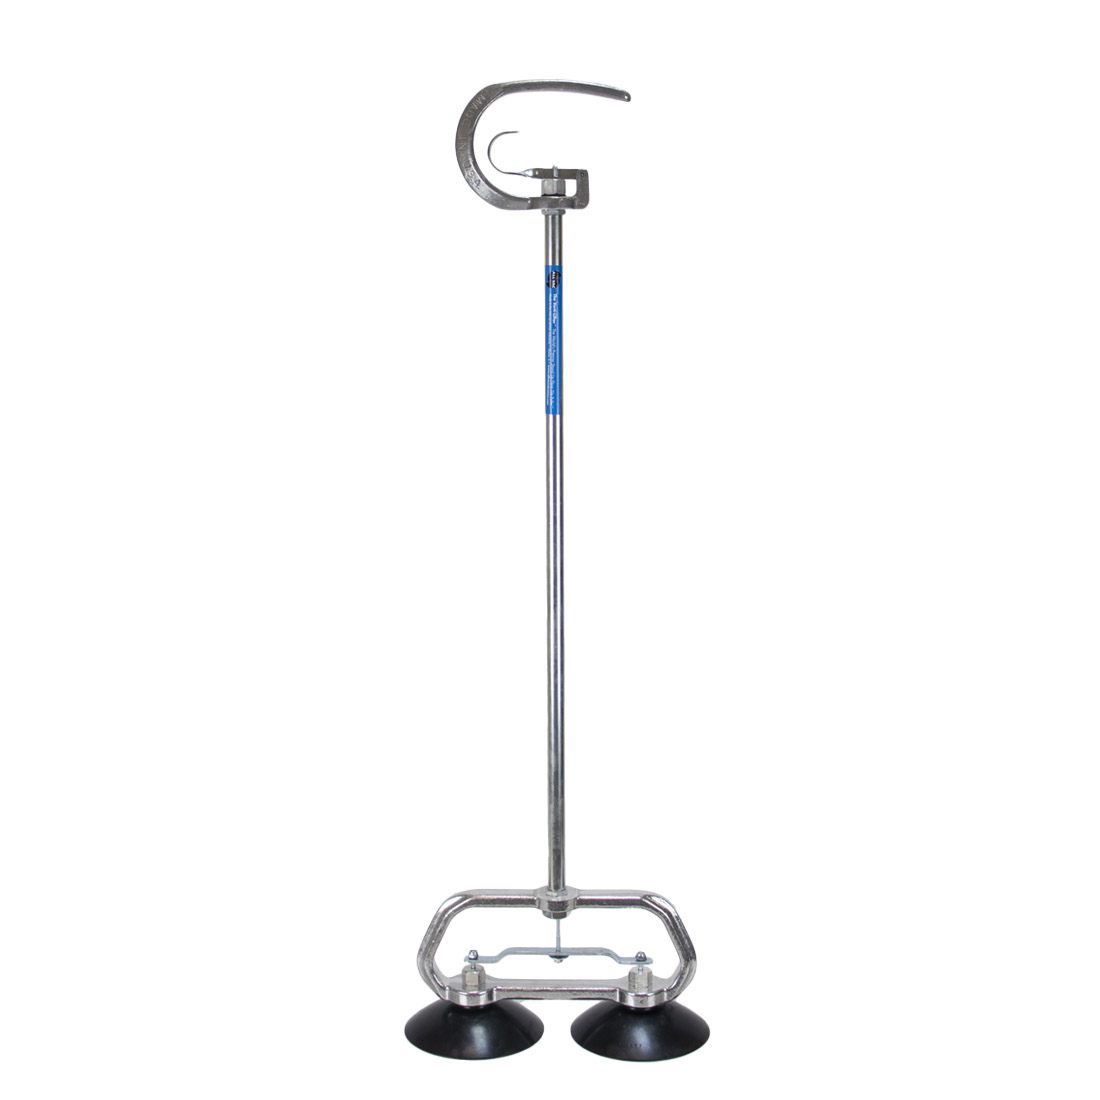 All Vac Verti-Lifter with Dual 5 Inch Cups - 33 Inch - Front VIew